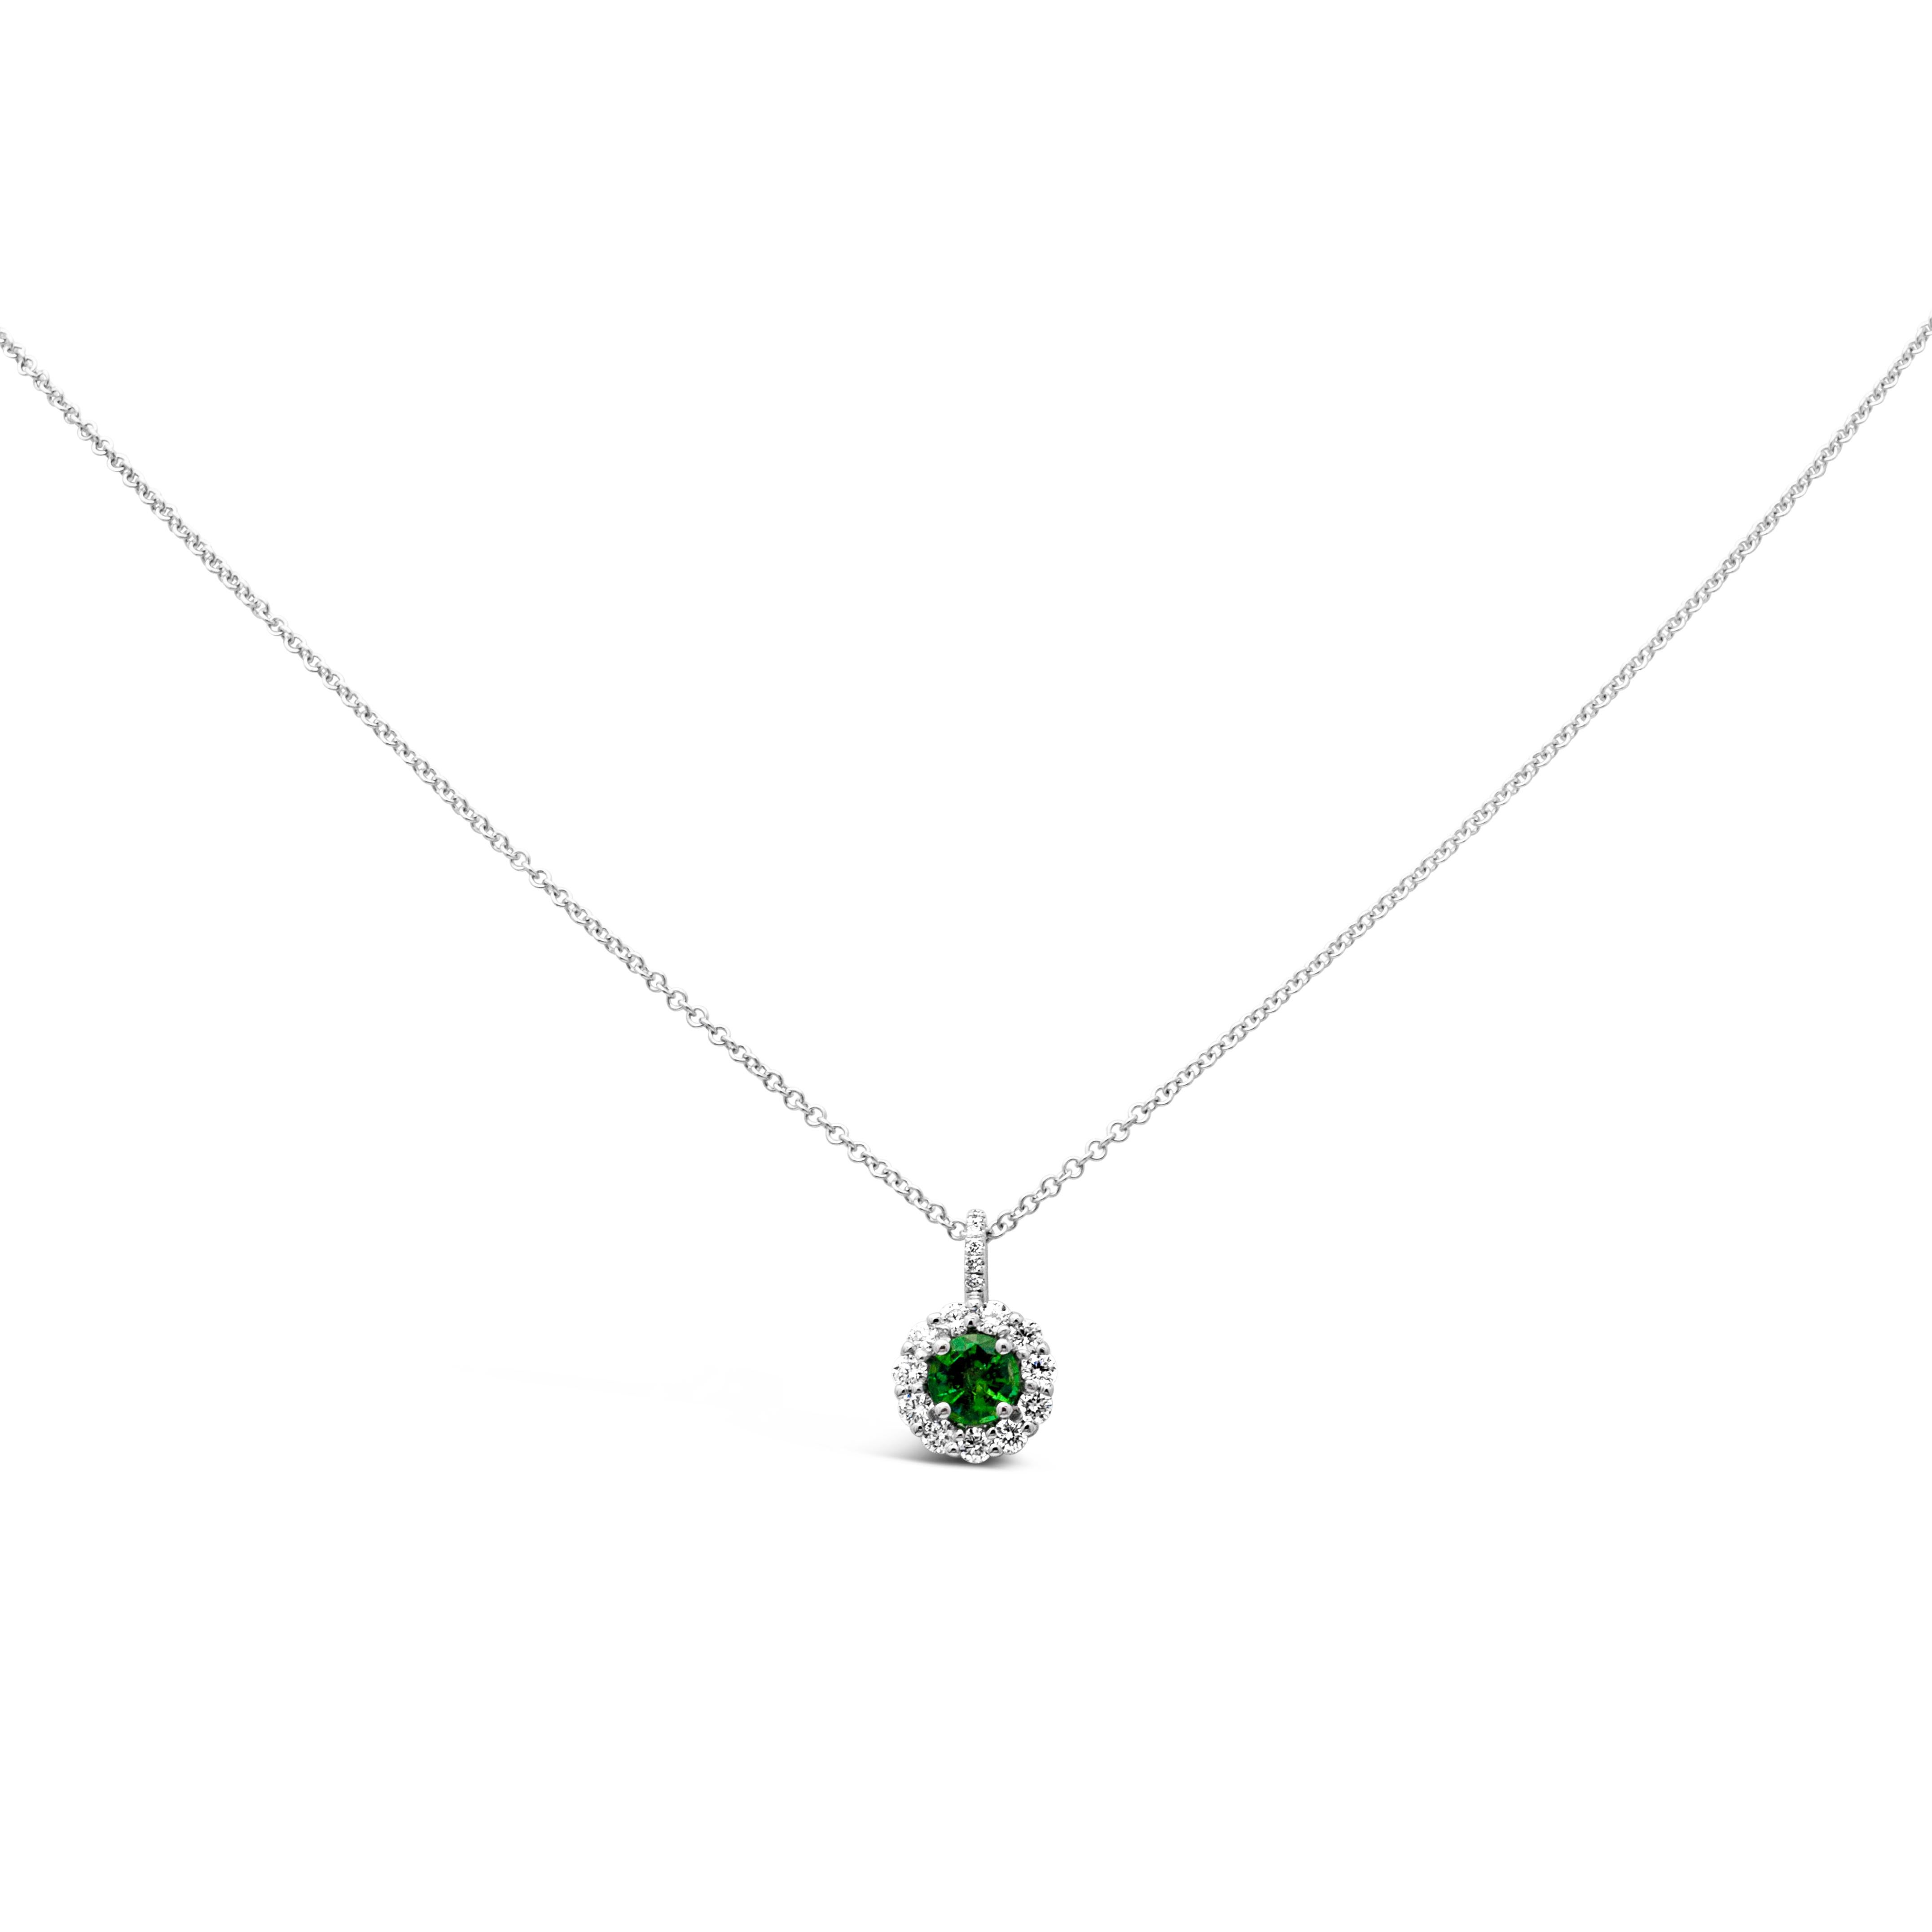 A classy pendant necklace showcasing a brilliant round cut color-rich green emerald weighing 0.33 carats, set in a classic four prong basket setting. Surrounded by a single row of round brilliant diamonds in a halo design weighing 0.25 carats total.